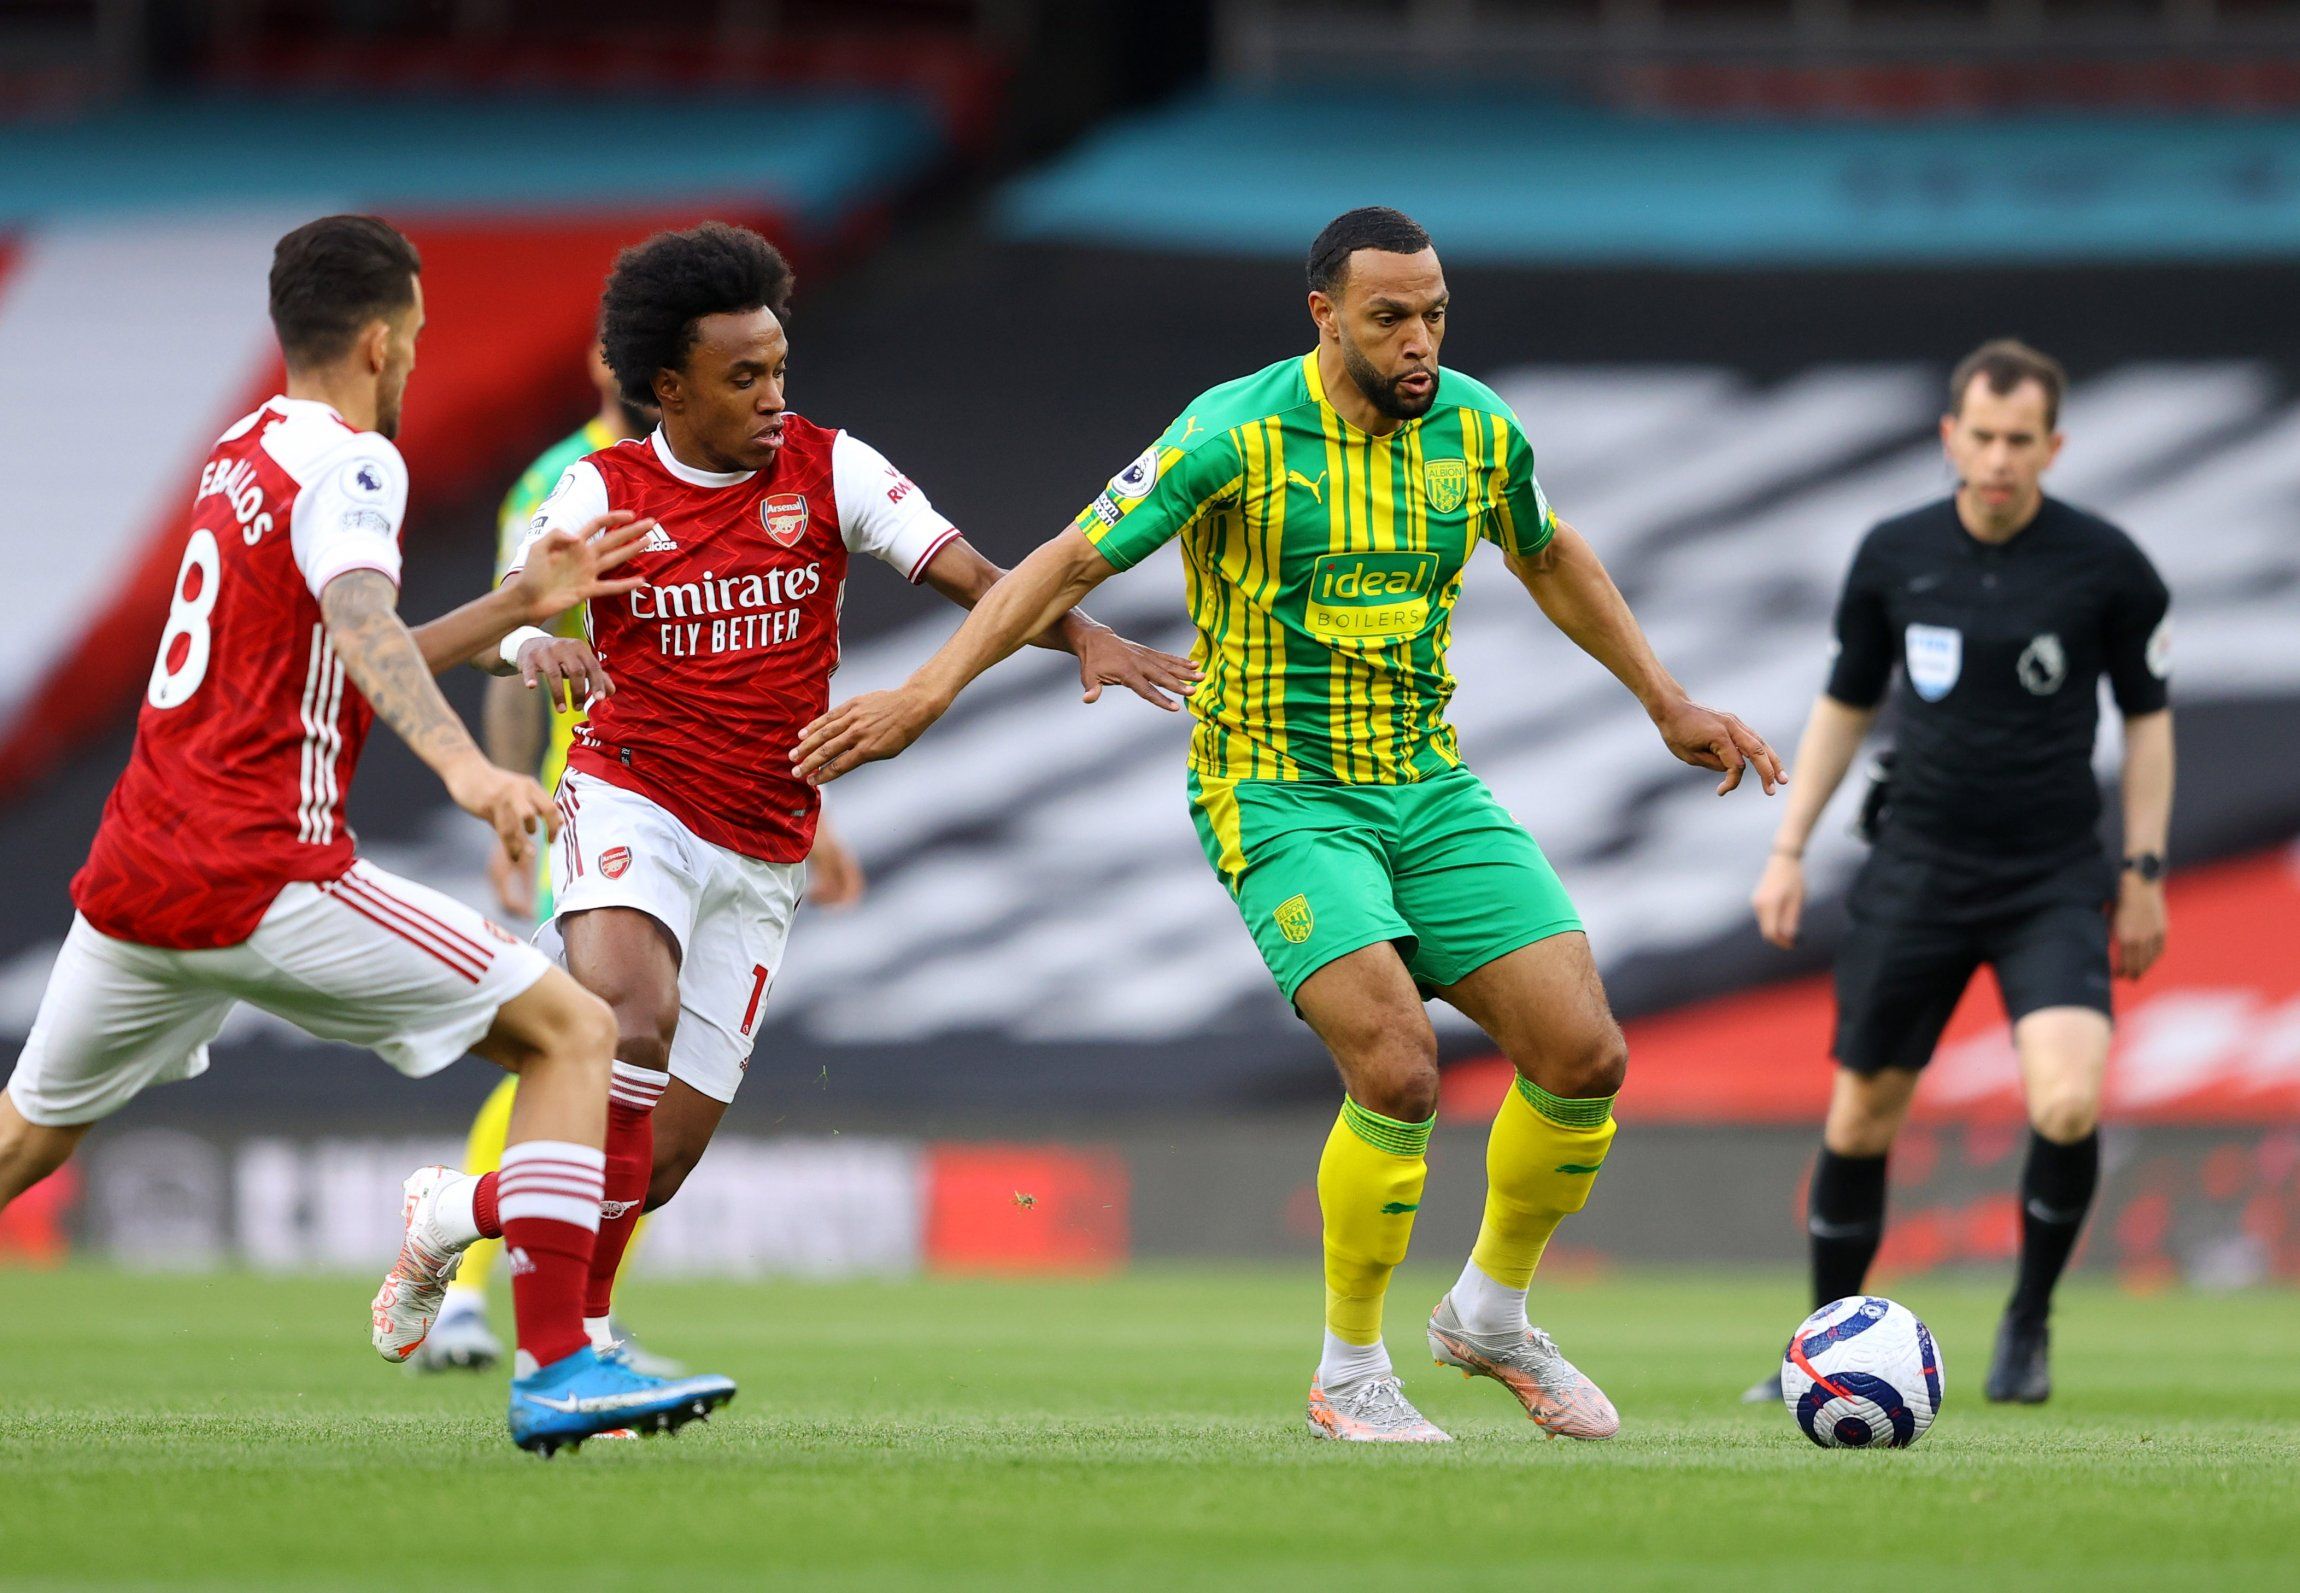 west brom midfielder matty phillips on the ball against arsenal premier league